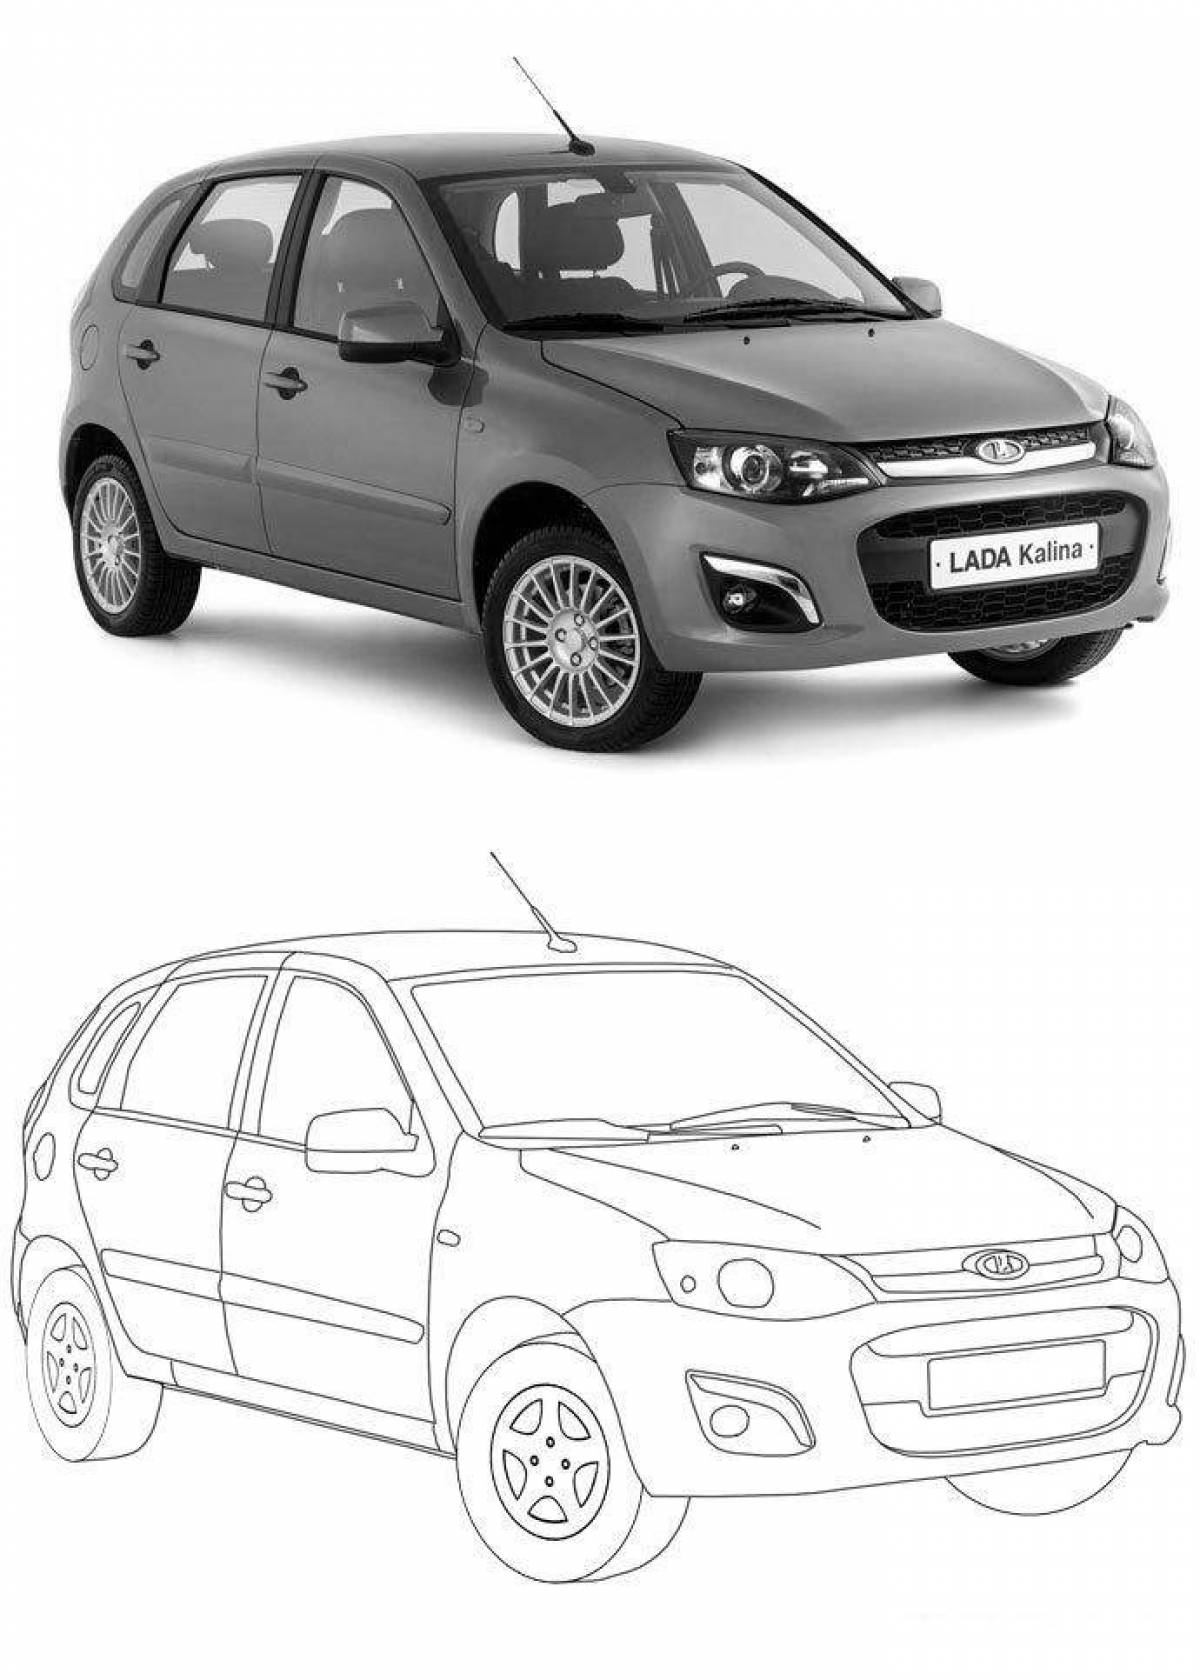 Exciting lada cars coloring pages